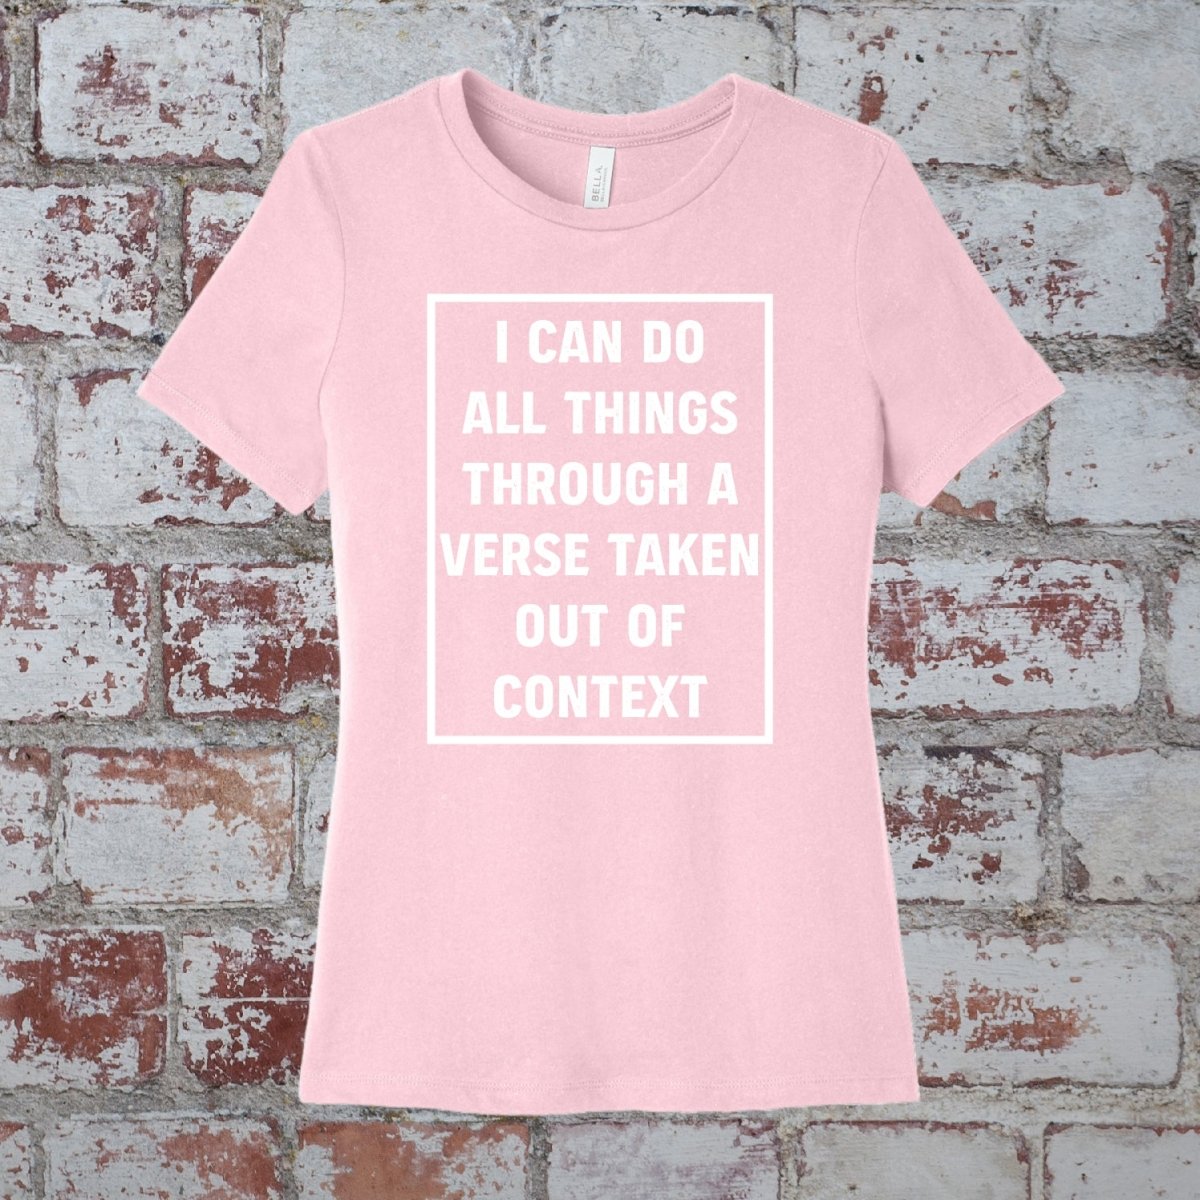 wshirt - All Things - Womens Tee - The Reformed Sage - #reformed# - #reformed_gifts# - #christian_gifts#